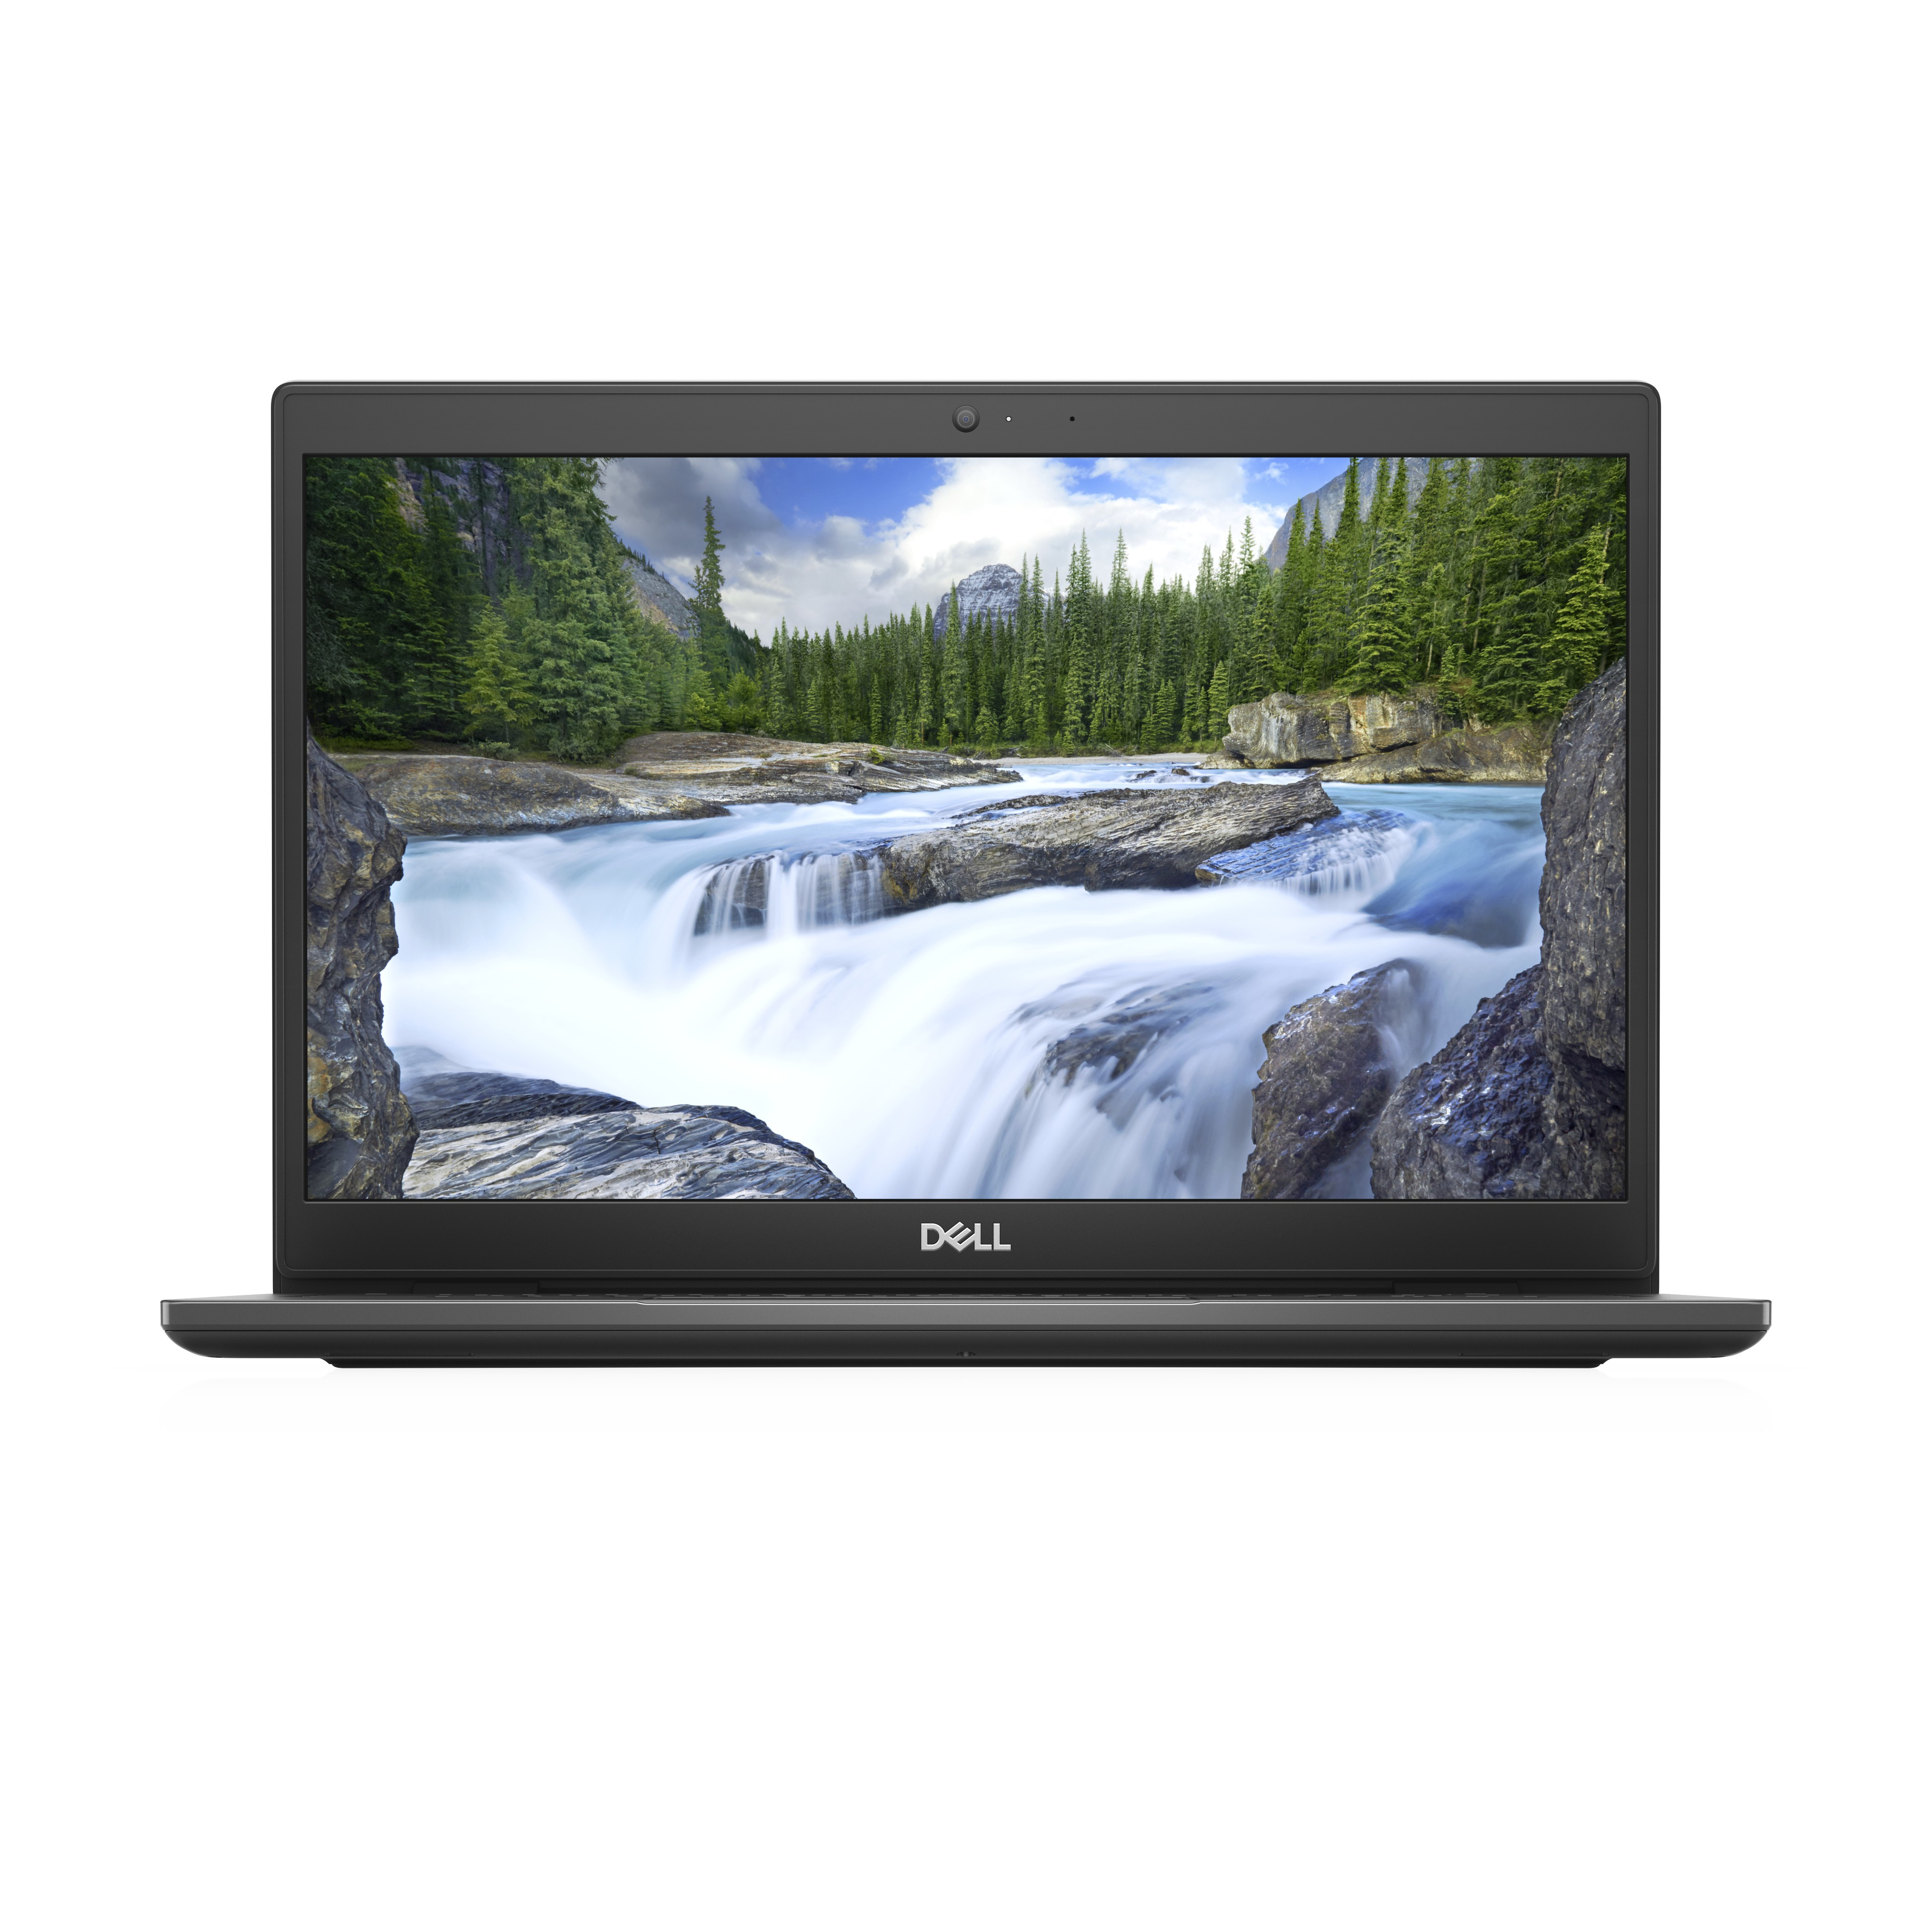 Latitude 3420 - Core I3 1115g4 / 3 Ghz - Win 10 Pro 64-bit - Uhd Graphics - 4 Gb Ram - 128 Gb Ssd Nvme, Class 35 - 14" Tn 1366 X 768 (hd) - Wi-fi 6 - With 1 Year Hardware Service With Onsite/in-home - image 1 of 5